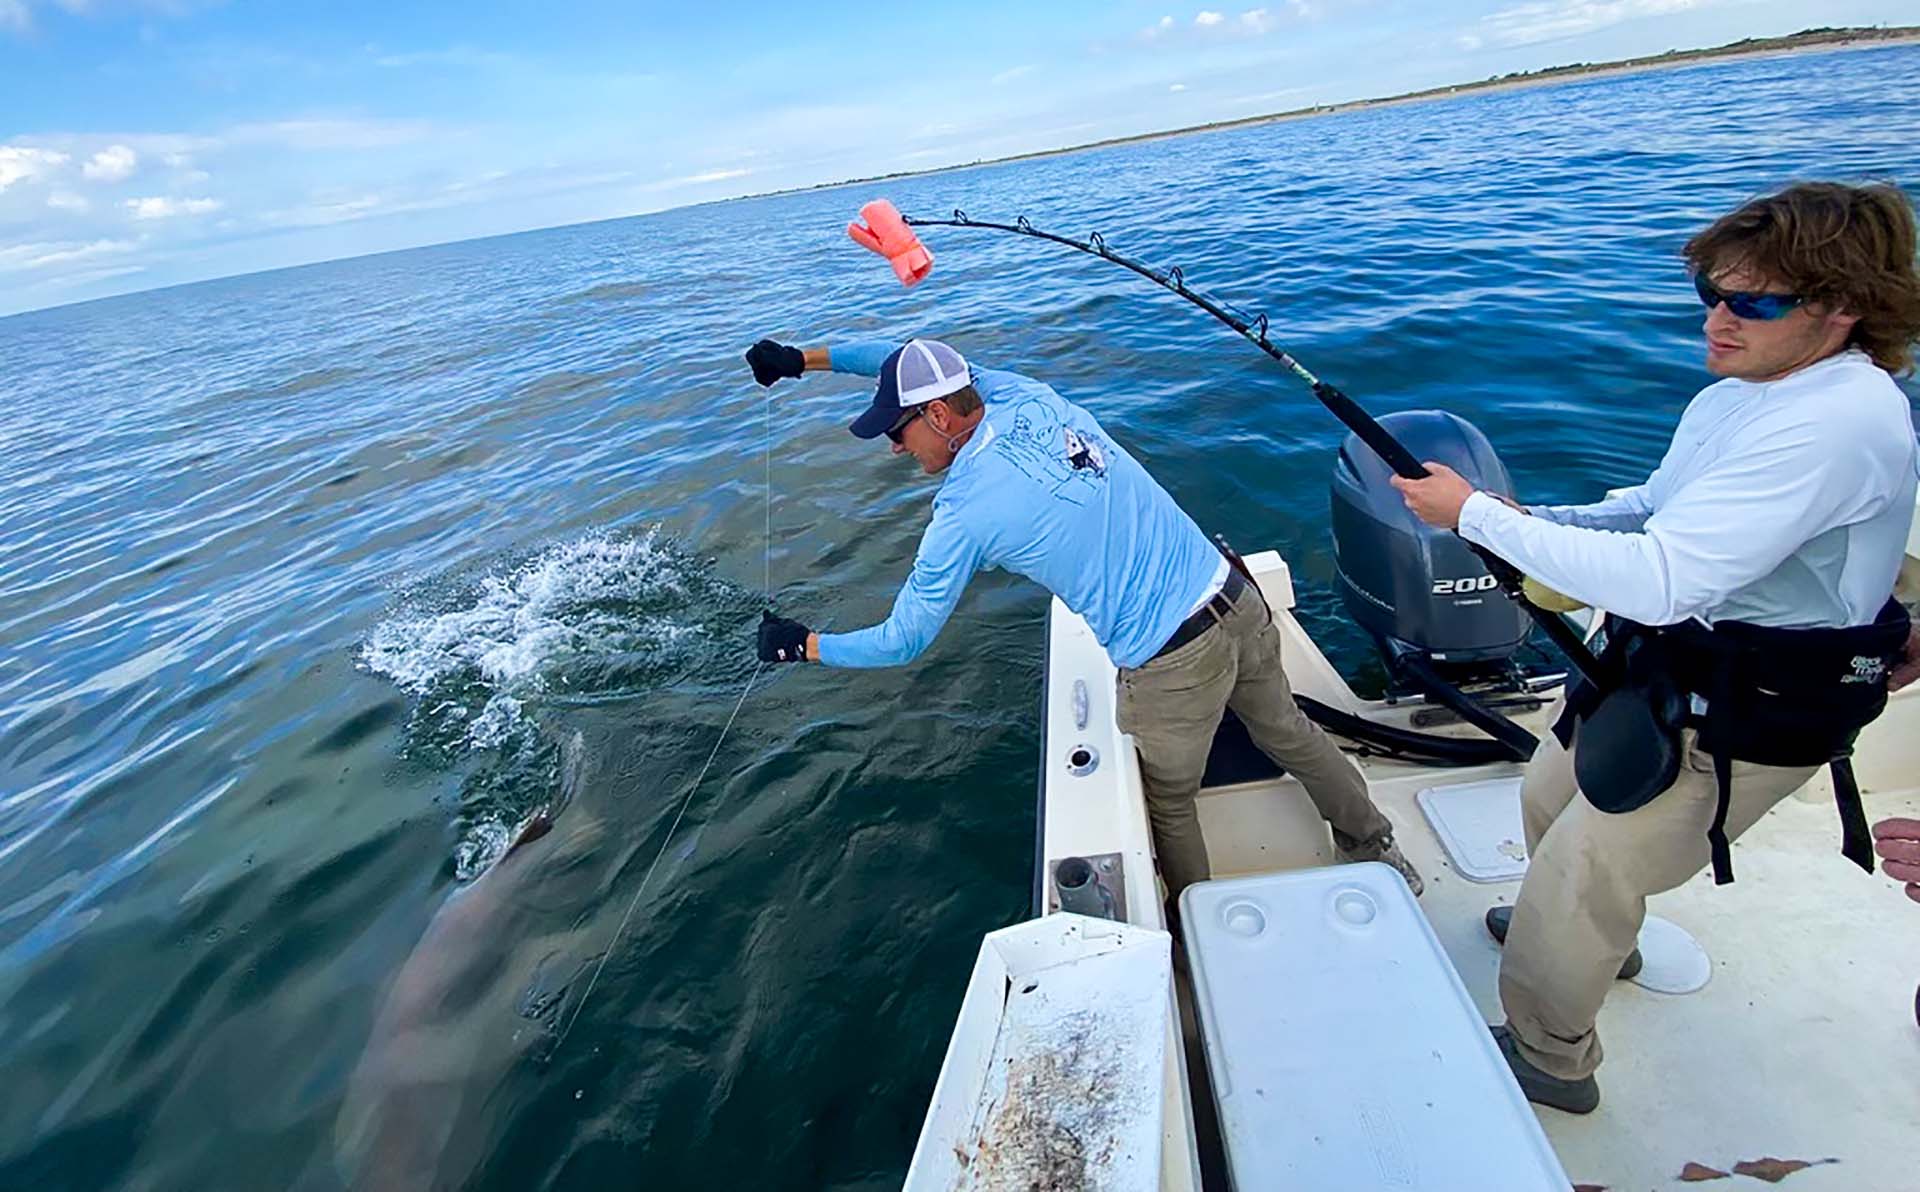 Southampton high school teacher Greg Metzger works with John Karr tiring out a sand tiger shark as part of a research trip off Long Island. Metzger, who teaches marine science, has been riding out into the Atlantic each year since 2015 to help gather information on sharks, work in the spotlight this year as shark attacks and sightings on Long Island grab headlines. Photo provided.